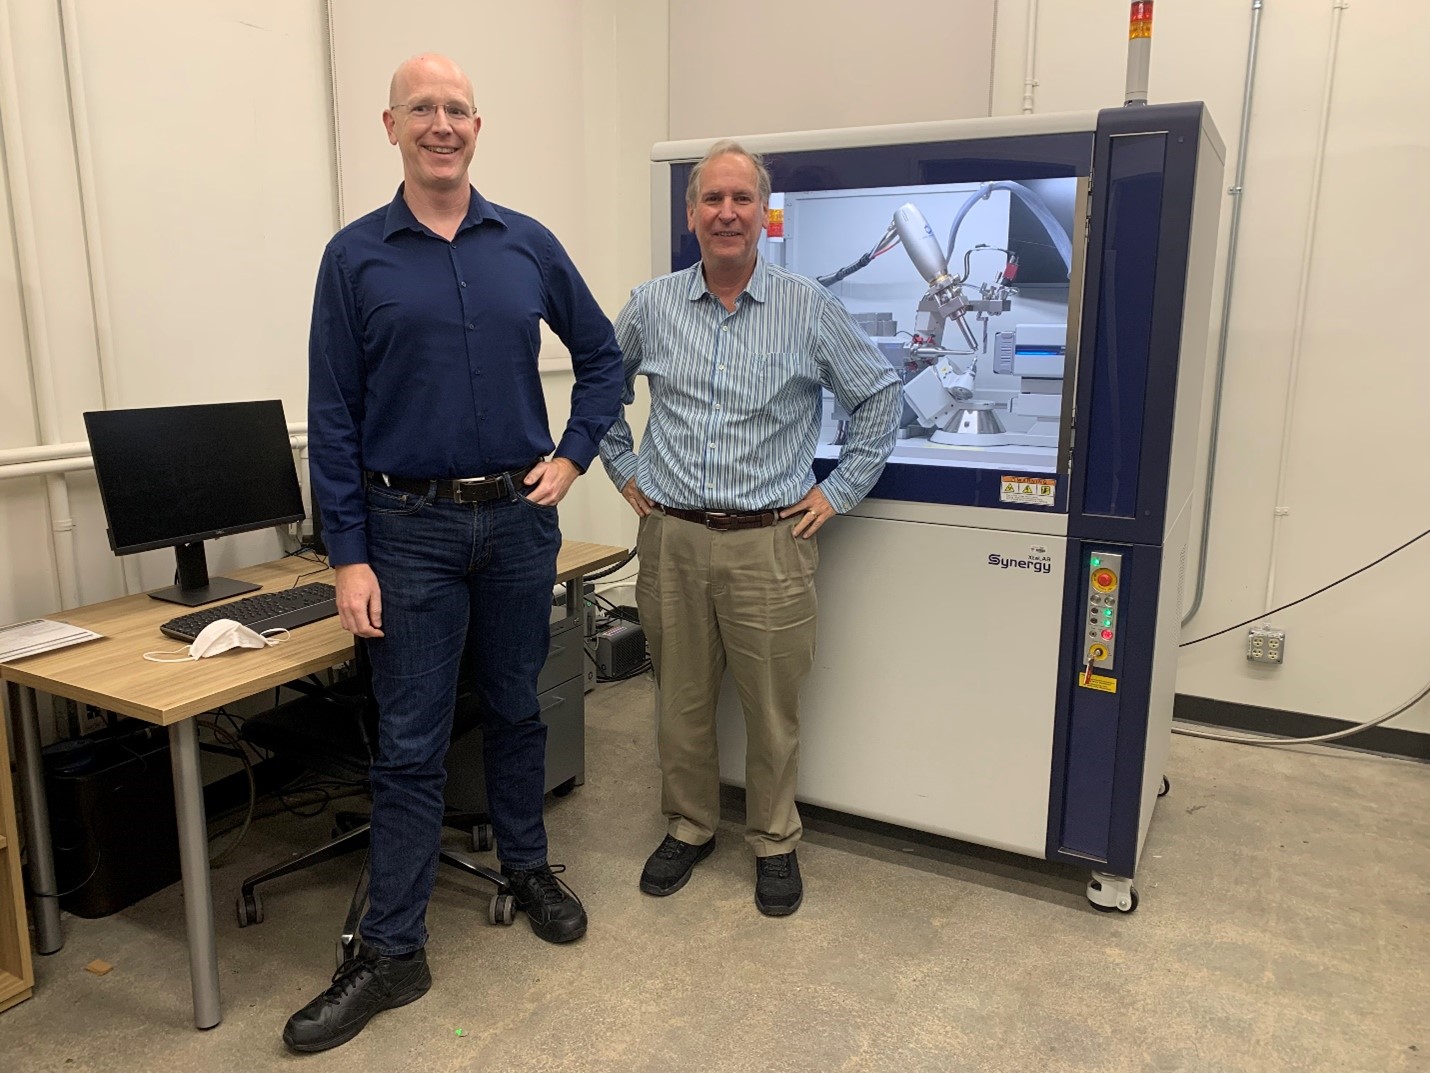 Travis Williams and Mark Thompson of the University of Southern California, Department of Chemistry with their dual XtaLAB Synergy-S